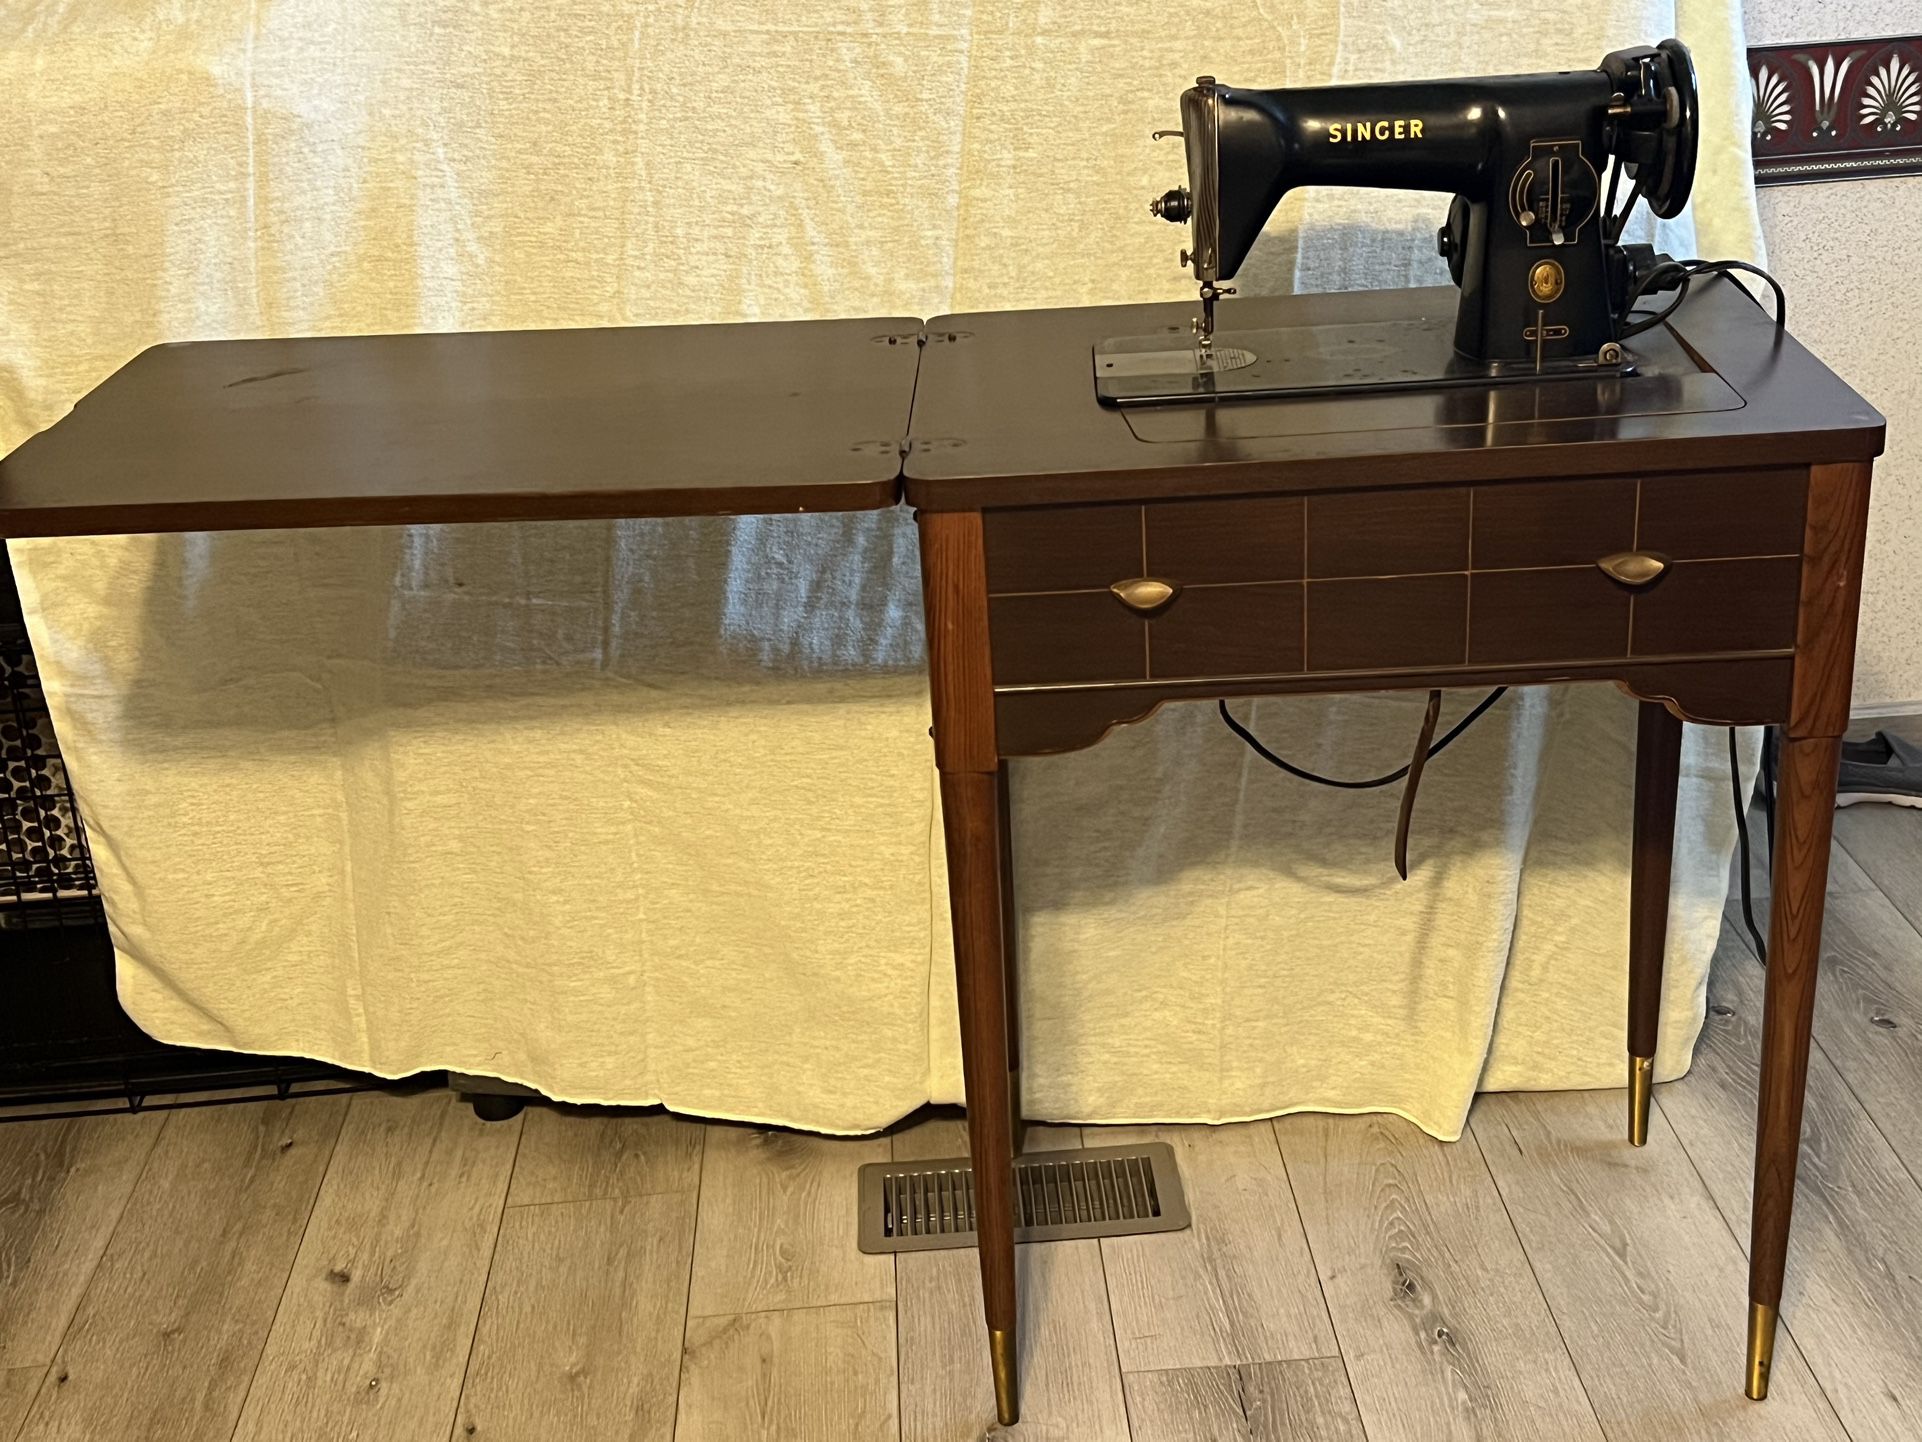 Singer Sewing Machine With Cabinet 